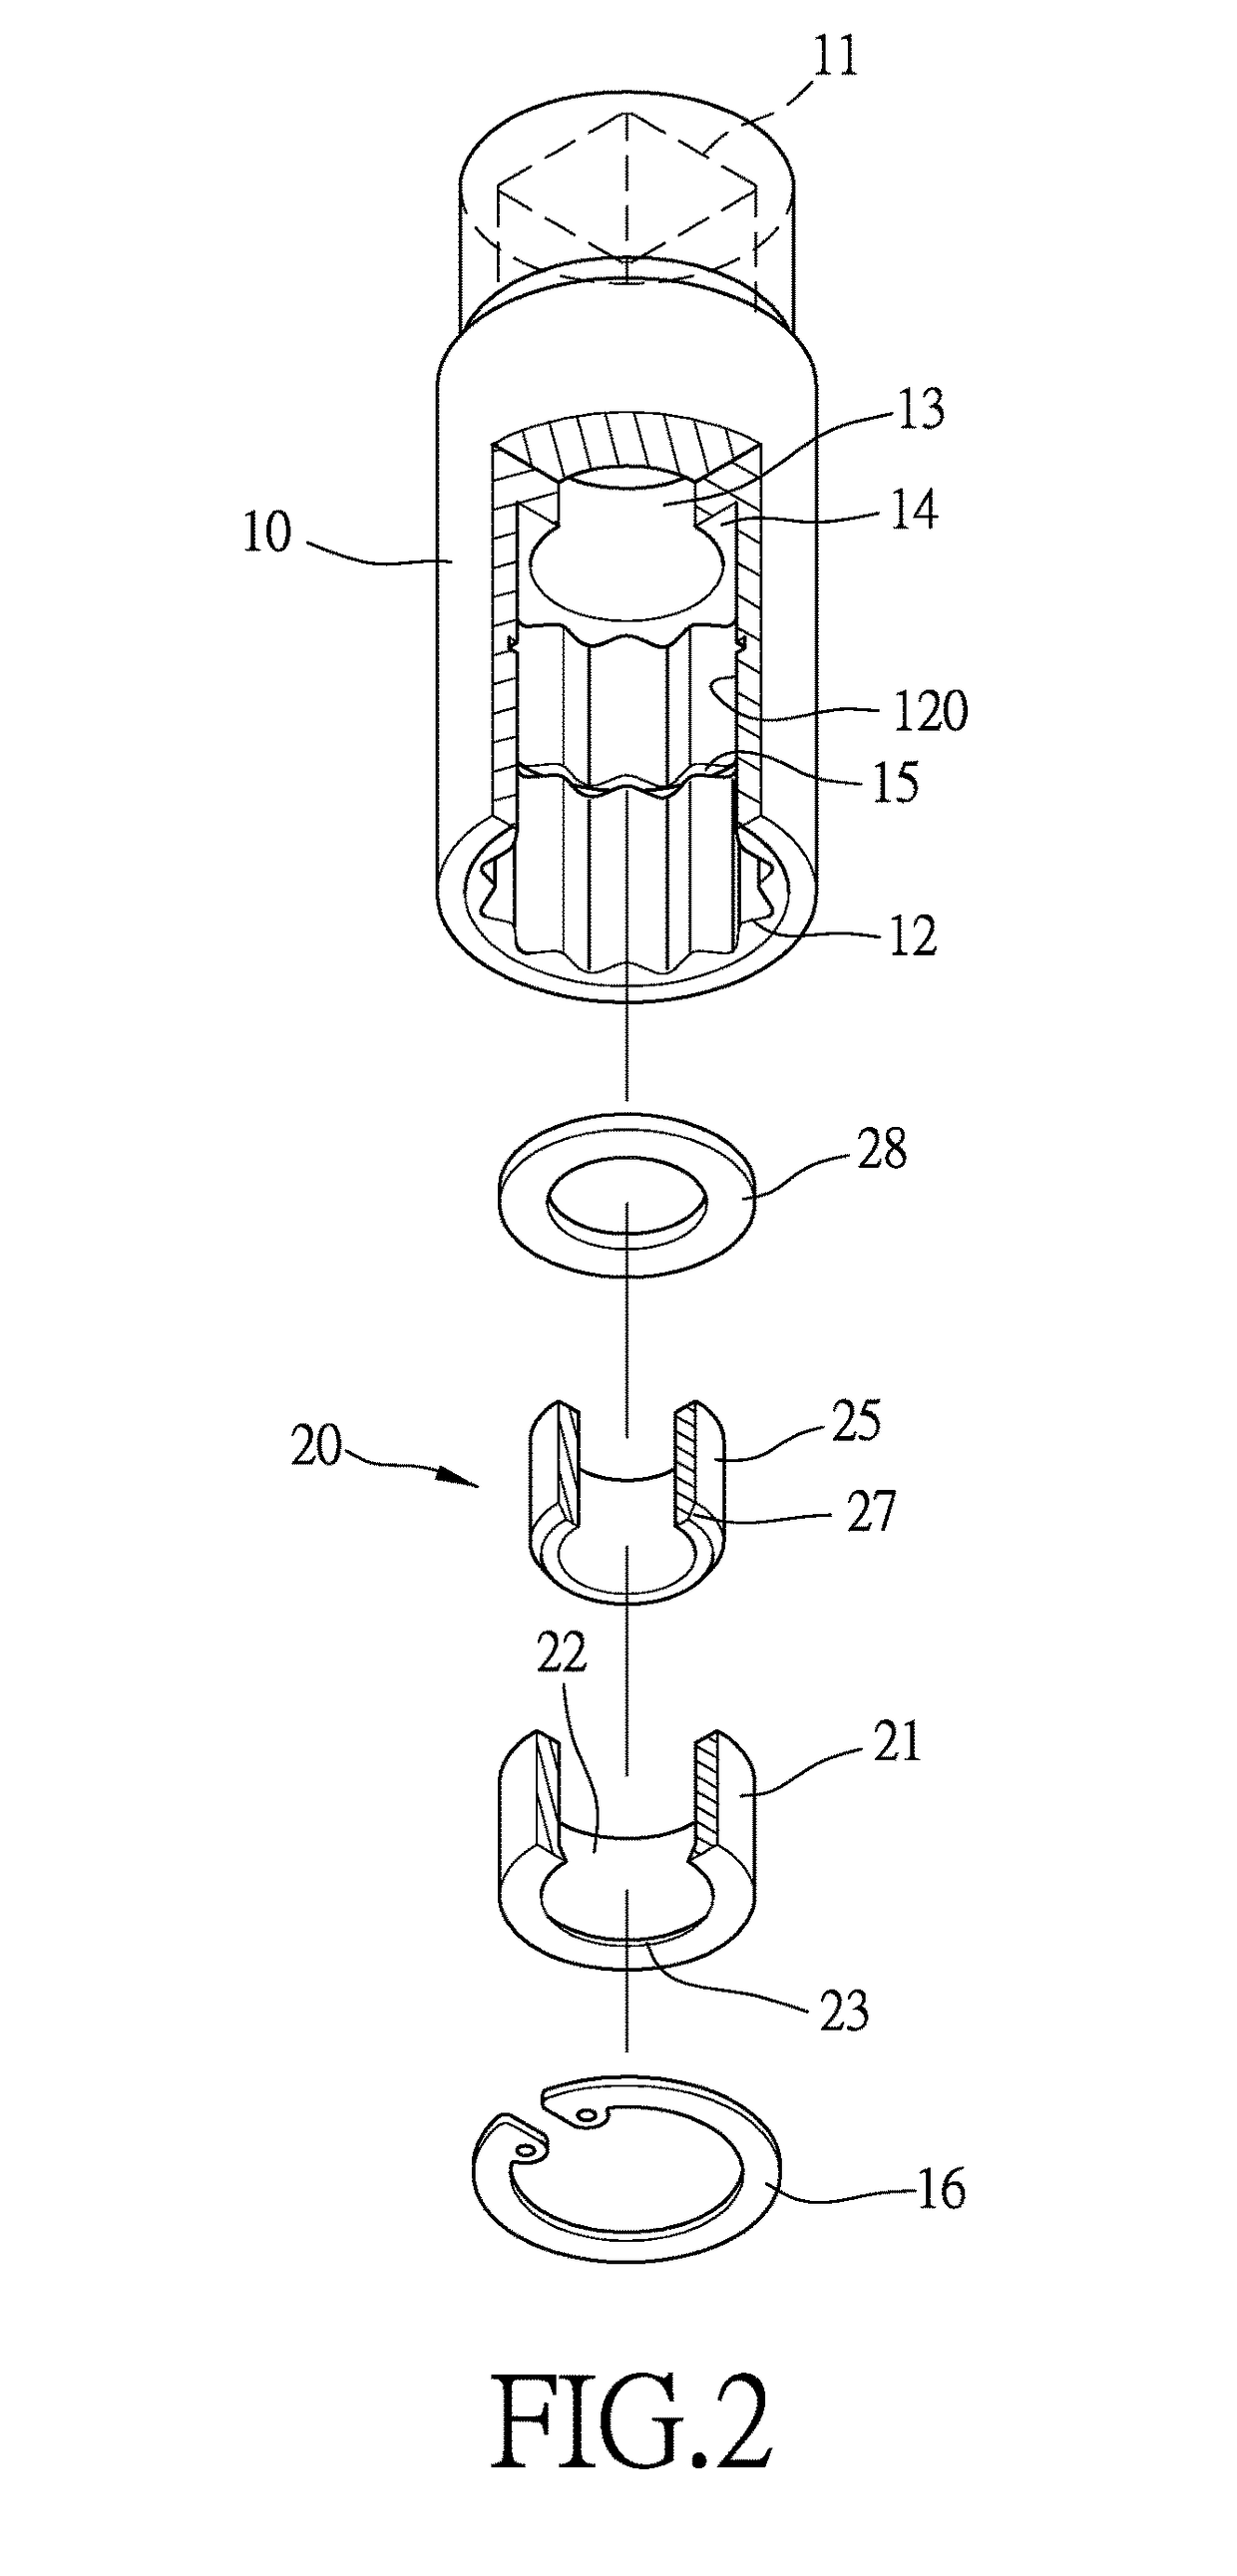 Magnetical attraction socket structure